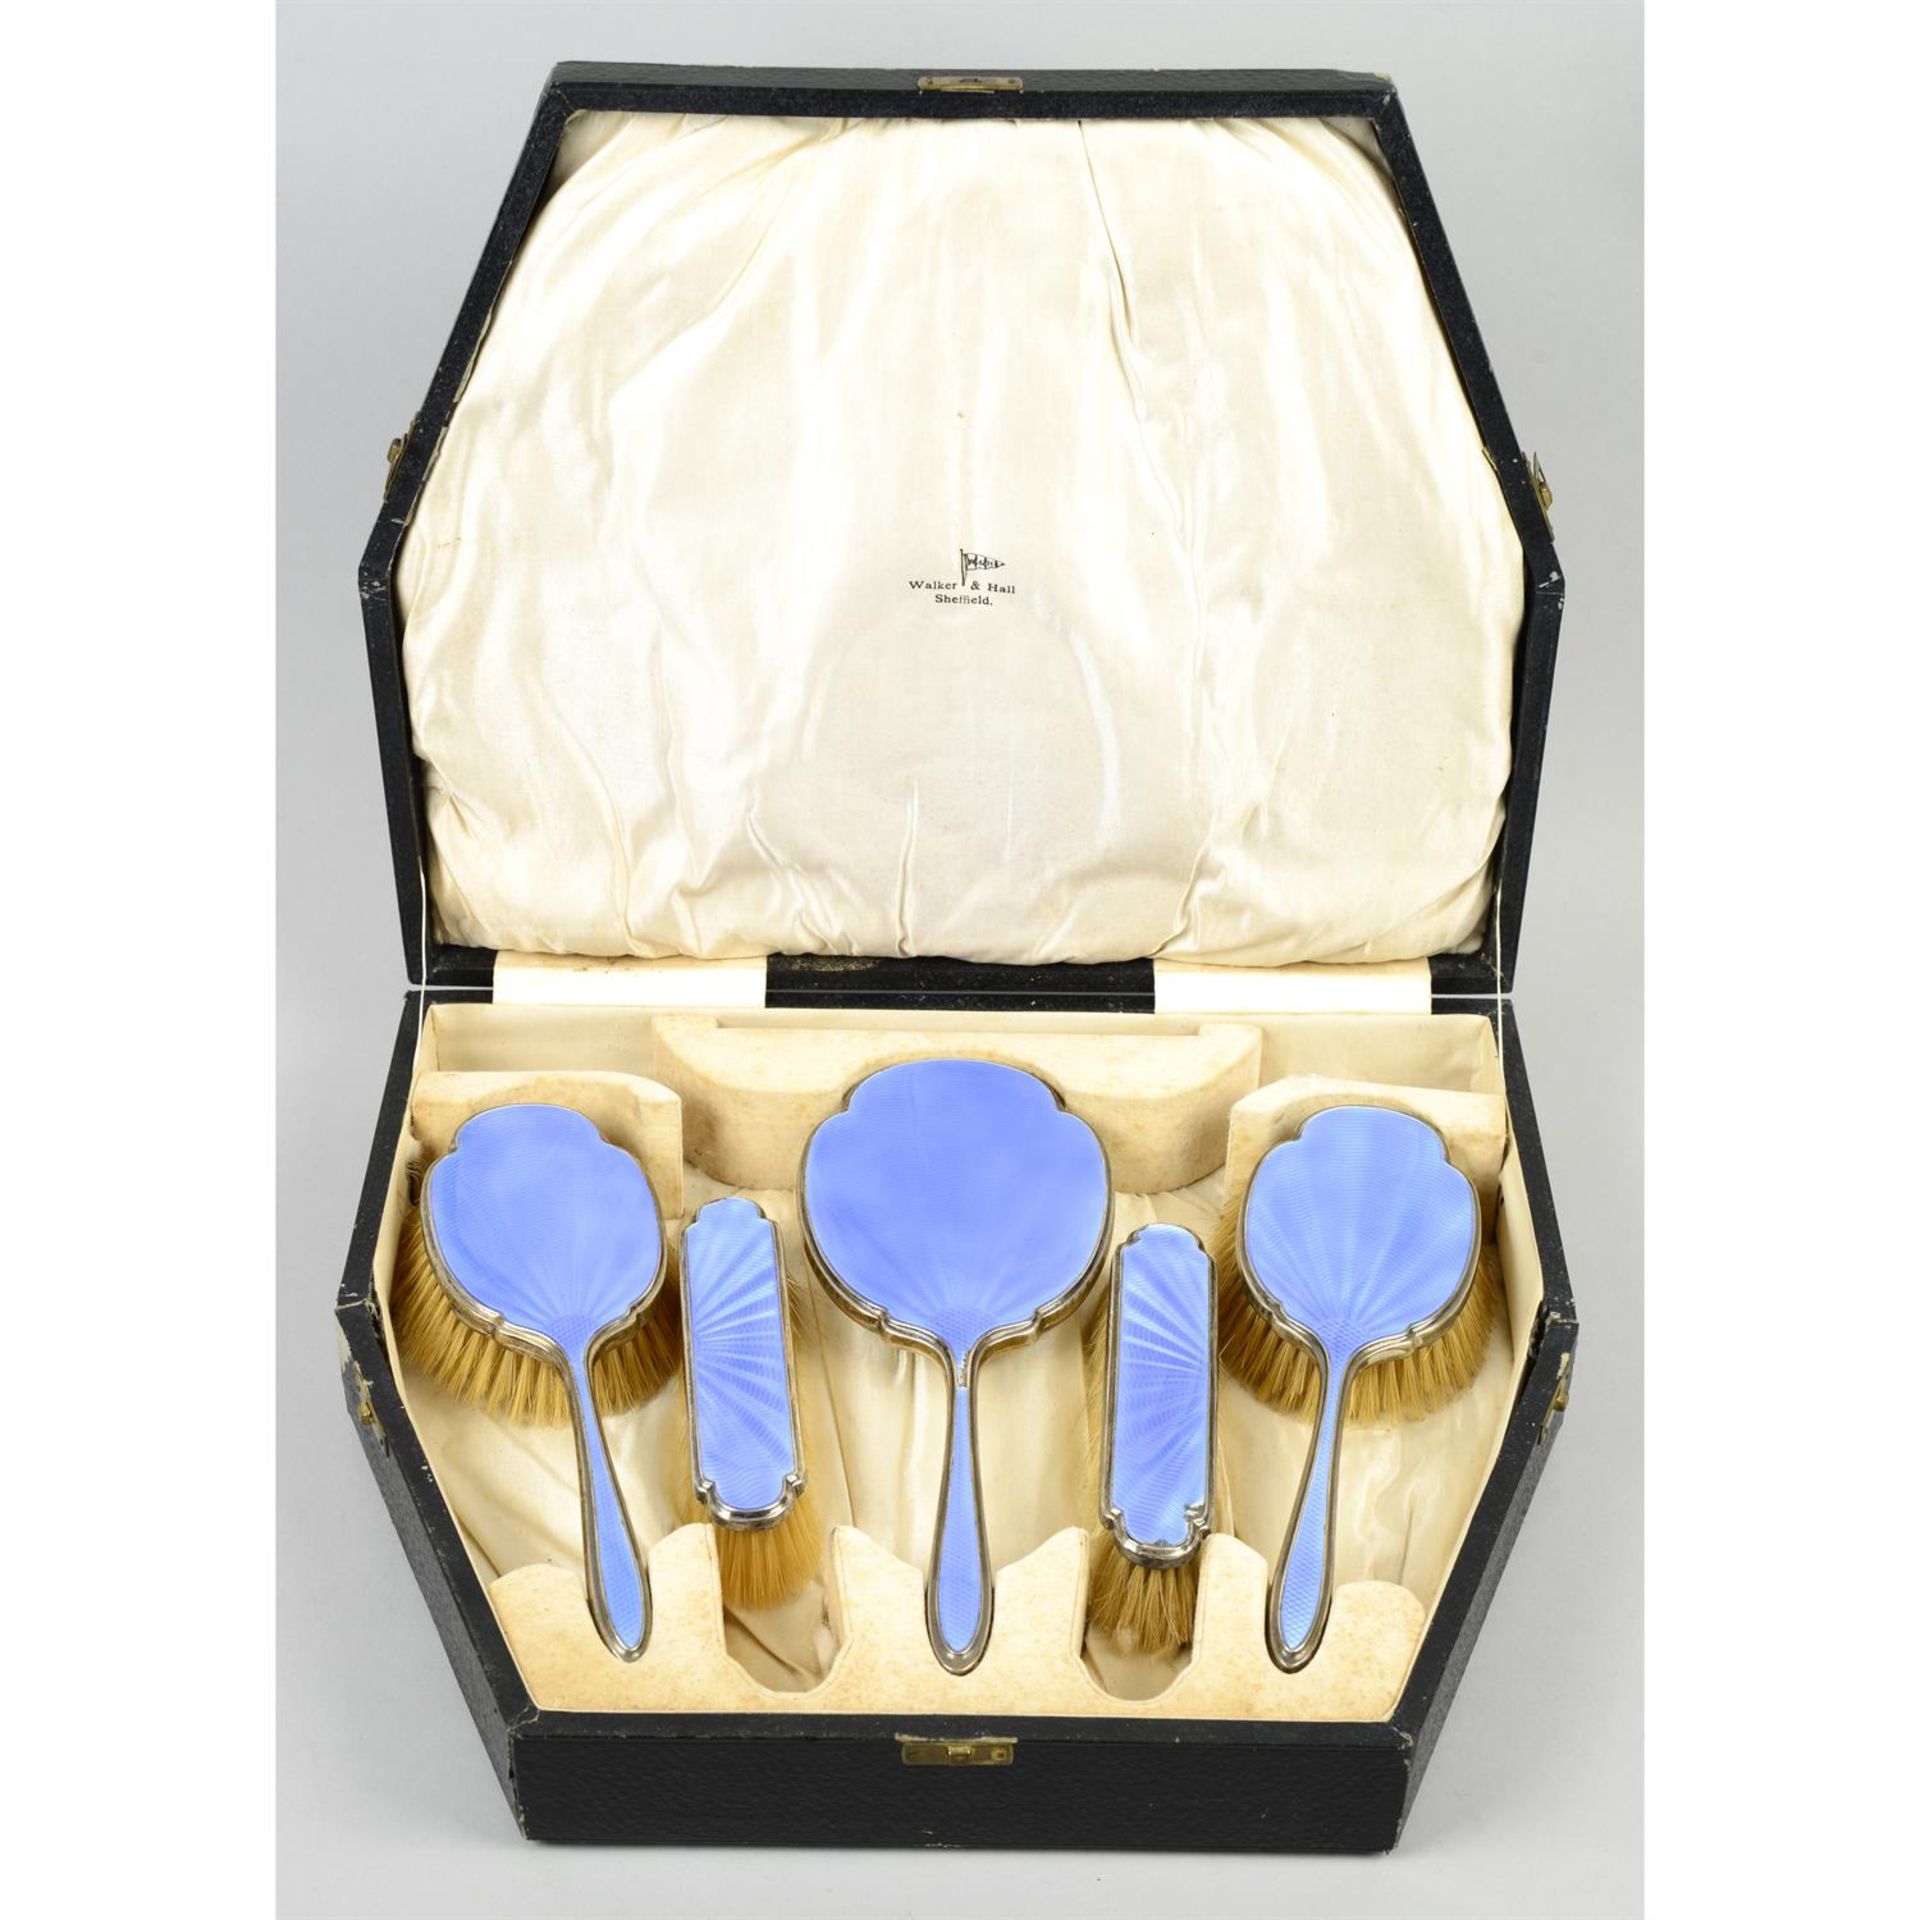 A cased 1930s' silver mounted & blue enamel part dressing table set.